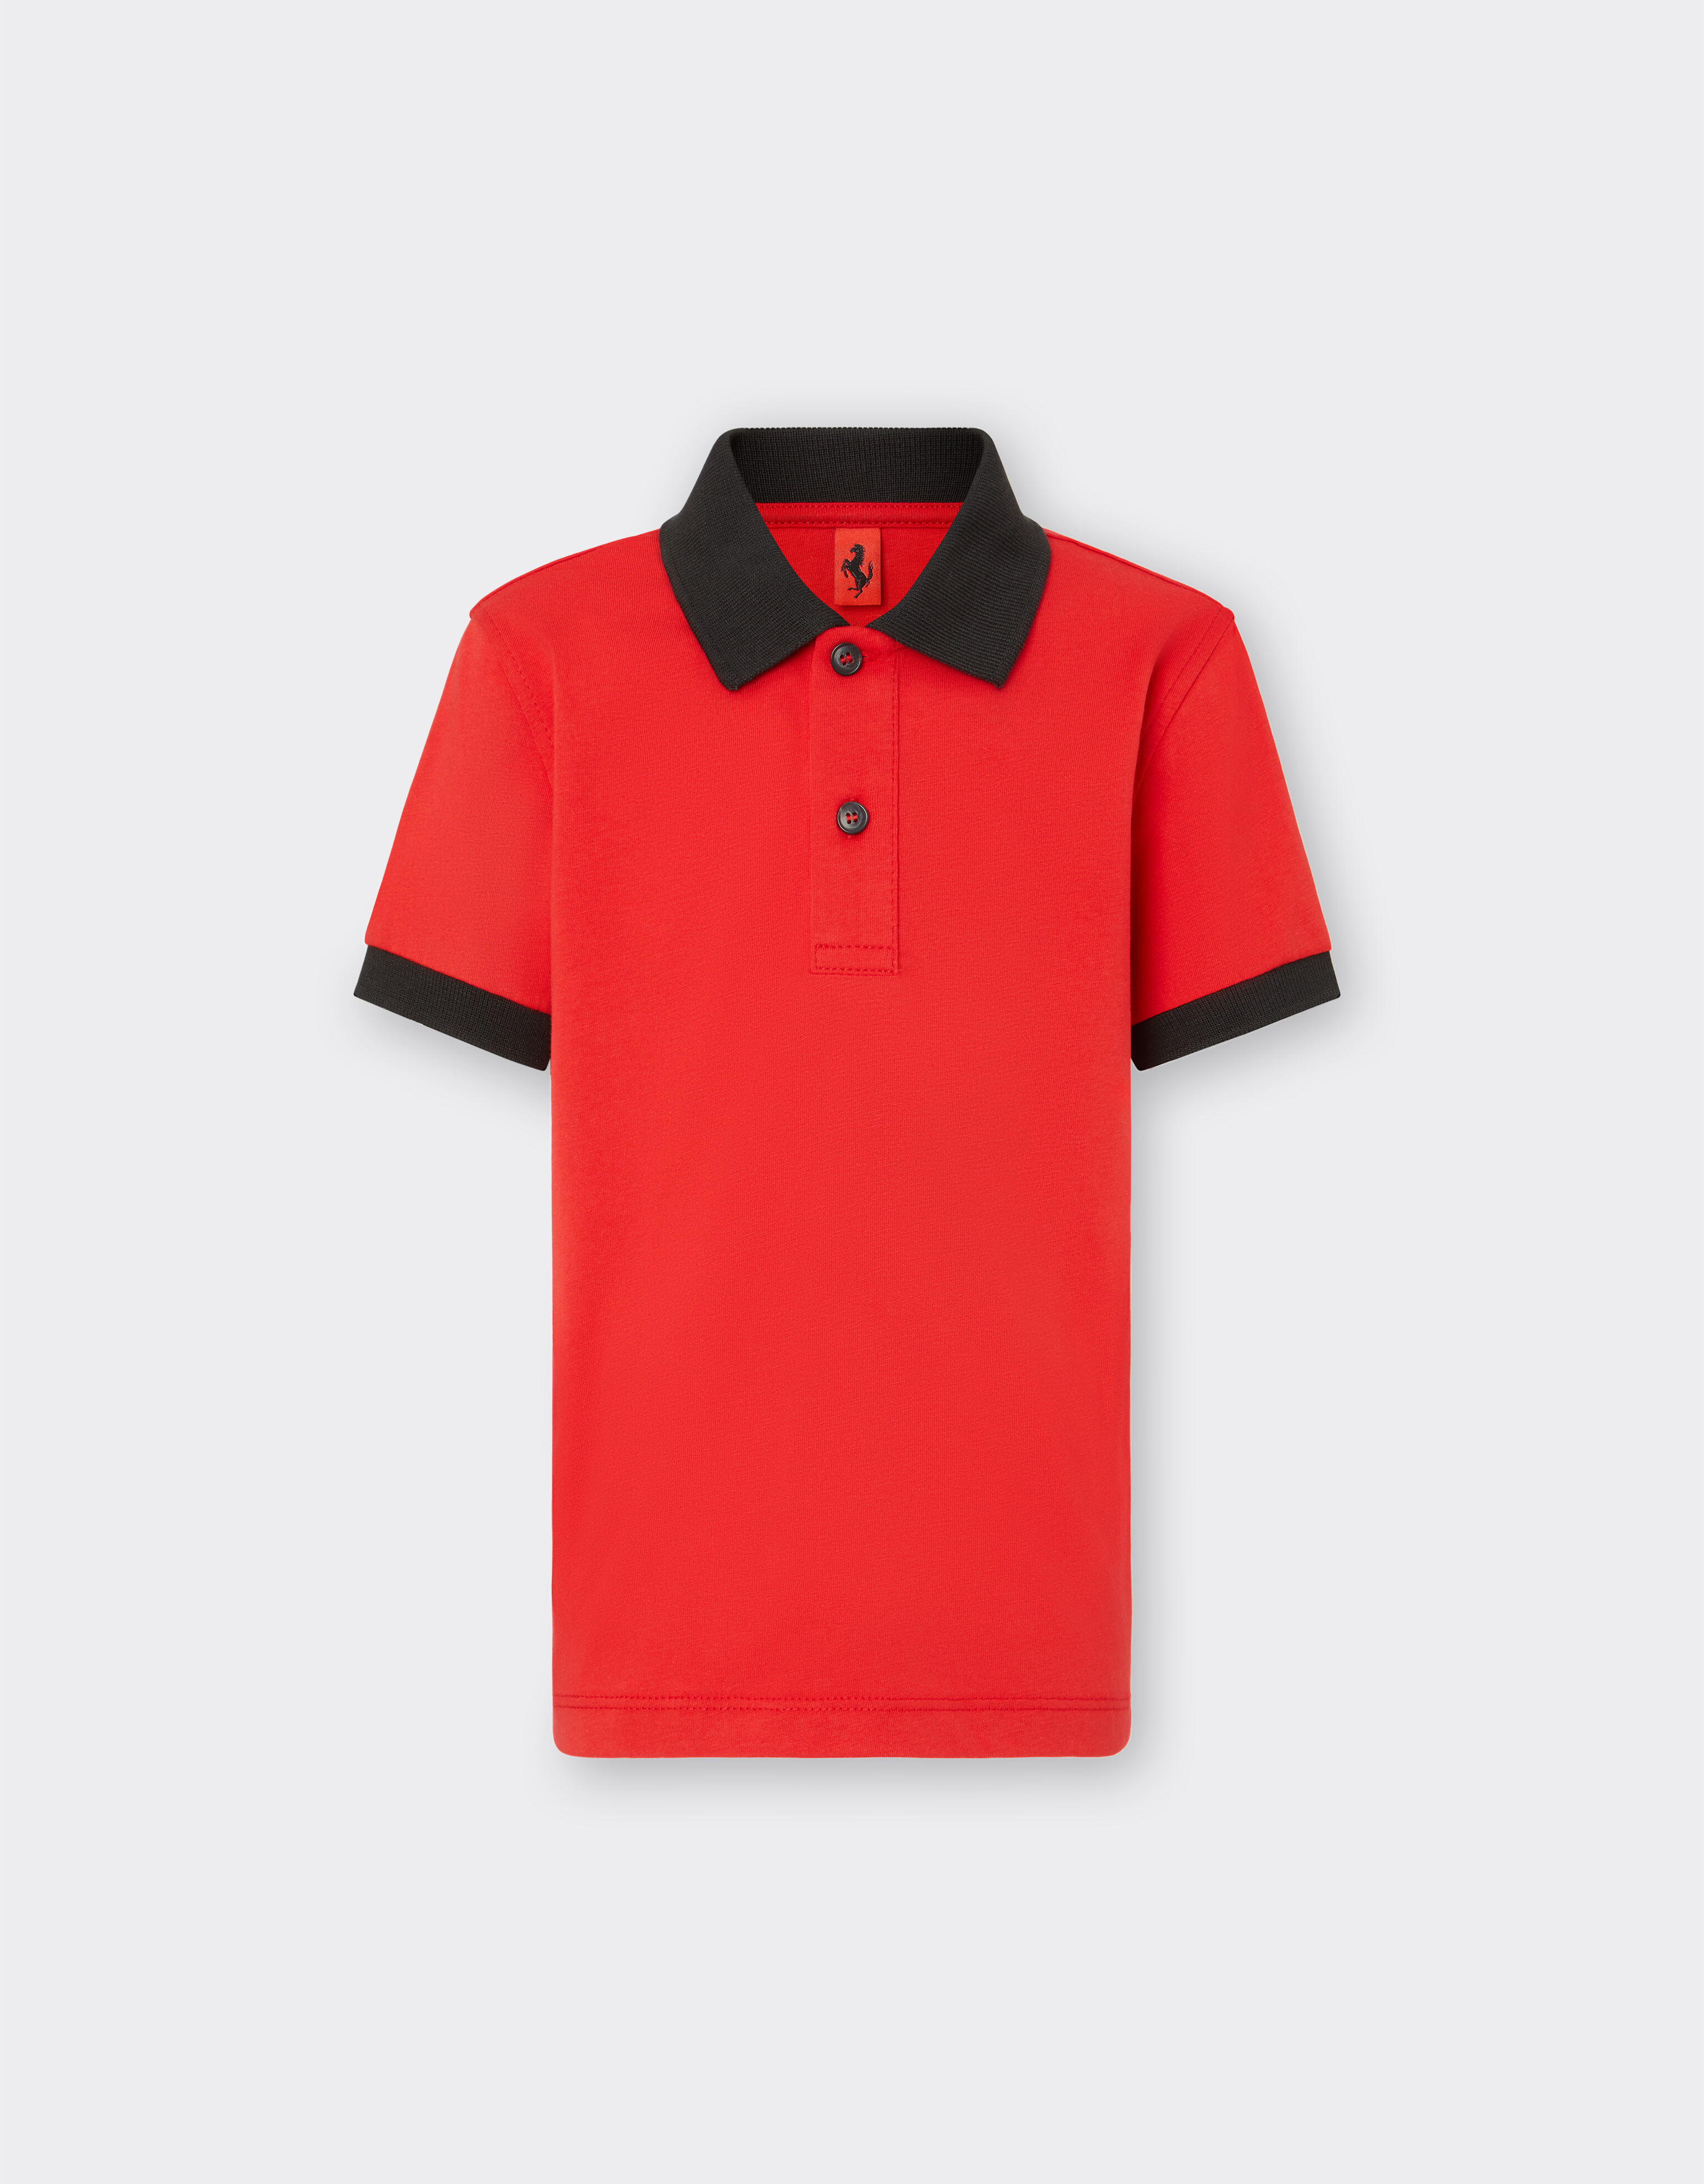 Ferrari Short sleeves - Contrast collar and cuffs - Front buttoning Rosso Corsa 20160fK